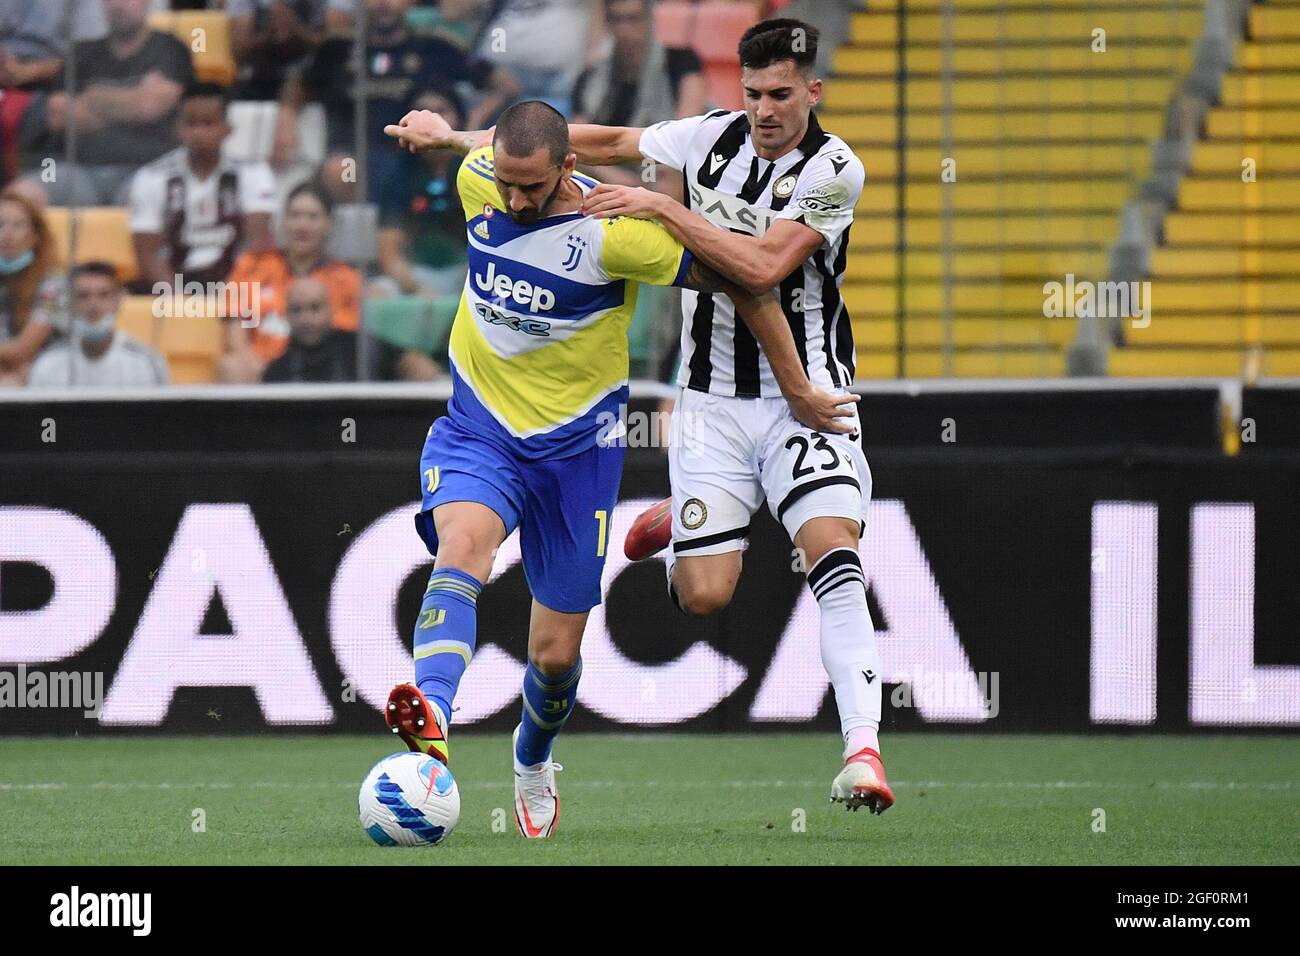 Udine, Italy. 22nd Aug, 2021. Leonardo Bonucci of Juventus FC and Ignacio  Pussetto of Udinese Calcio compete for the ball during the Serie A football  match between Udinese Calcio and Juventus FC